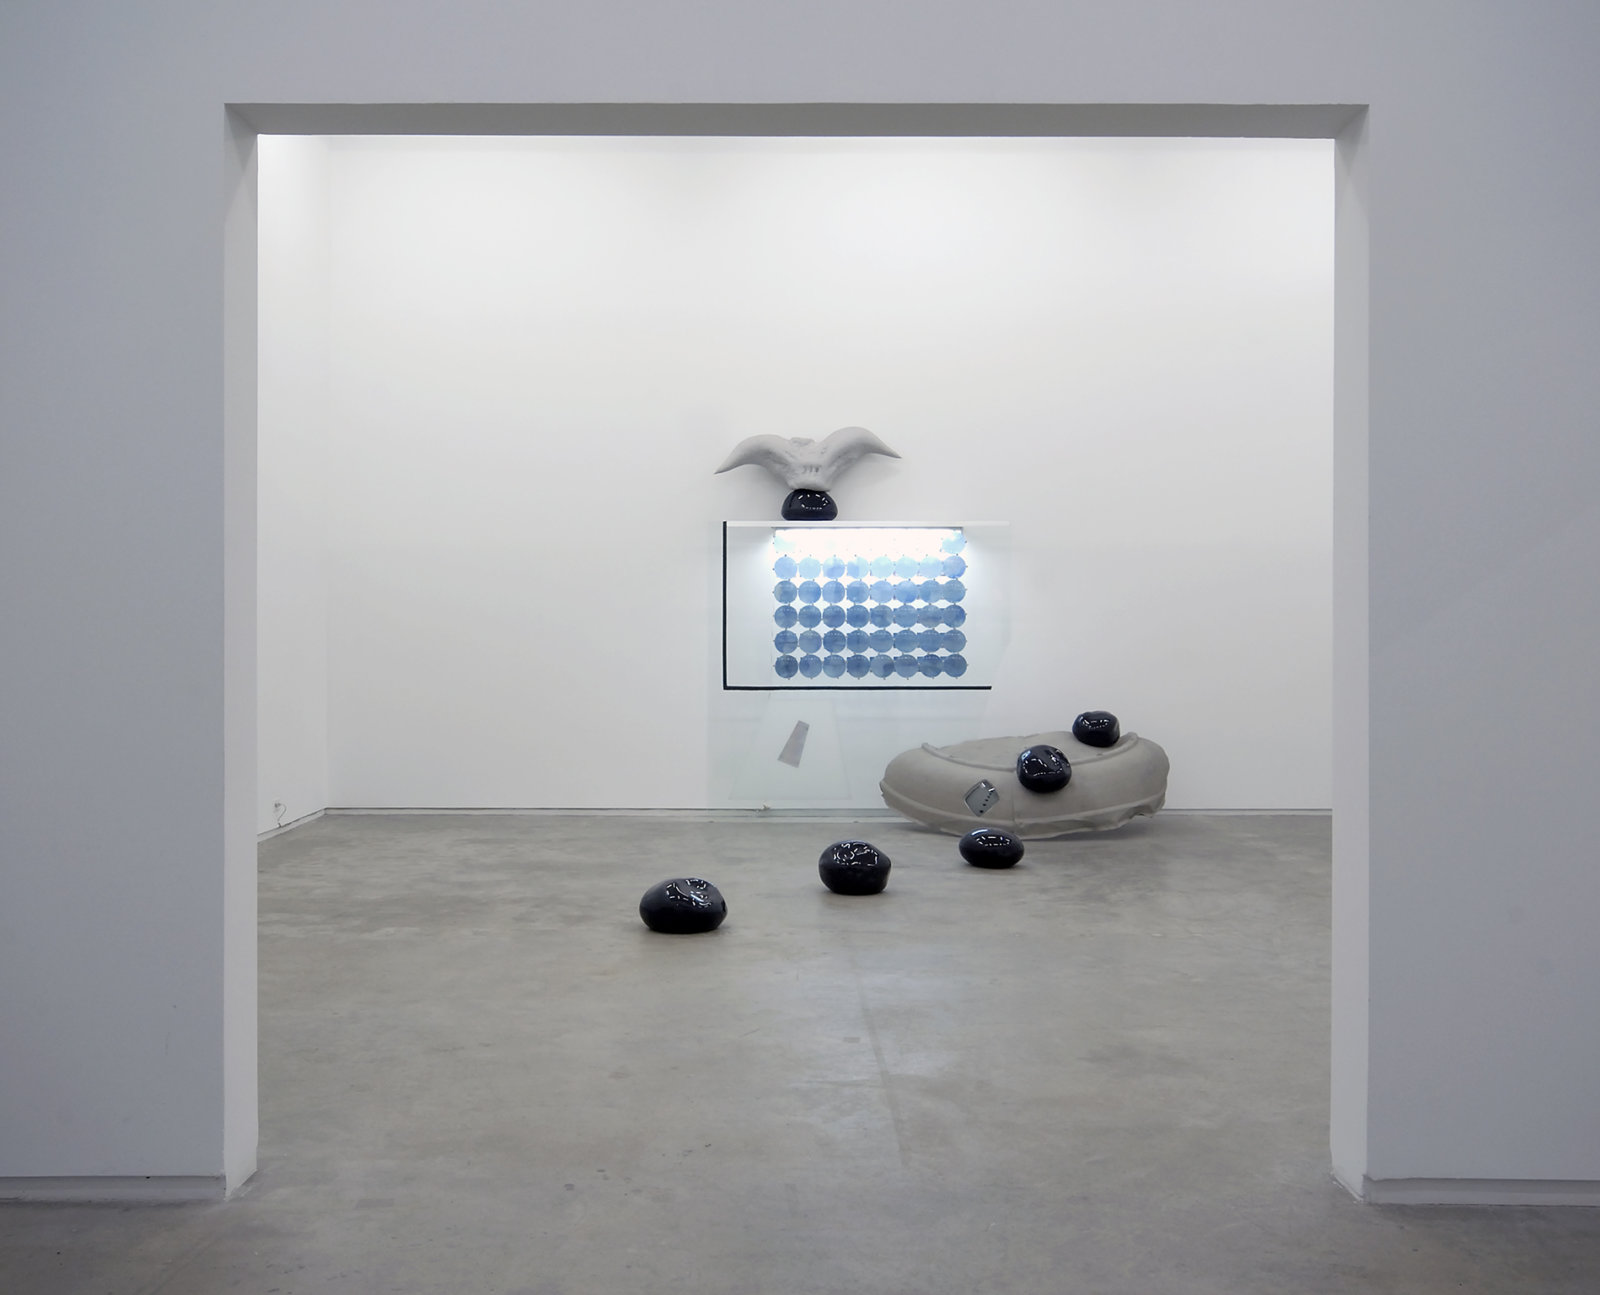 Jerry Pethick, Roof to Heaven Too, 1986–1988, blown glass, glass, rubber tire, TV tube, stones, aluminum, spectrafoil, 48 instamatic prints, 48 blue fresnel lenses, styrofoam, silicone, fluorescent light fixture, 169 x 111 x 75 in. (429 x 282 x 191 cm)